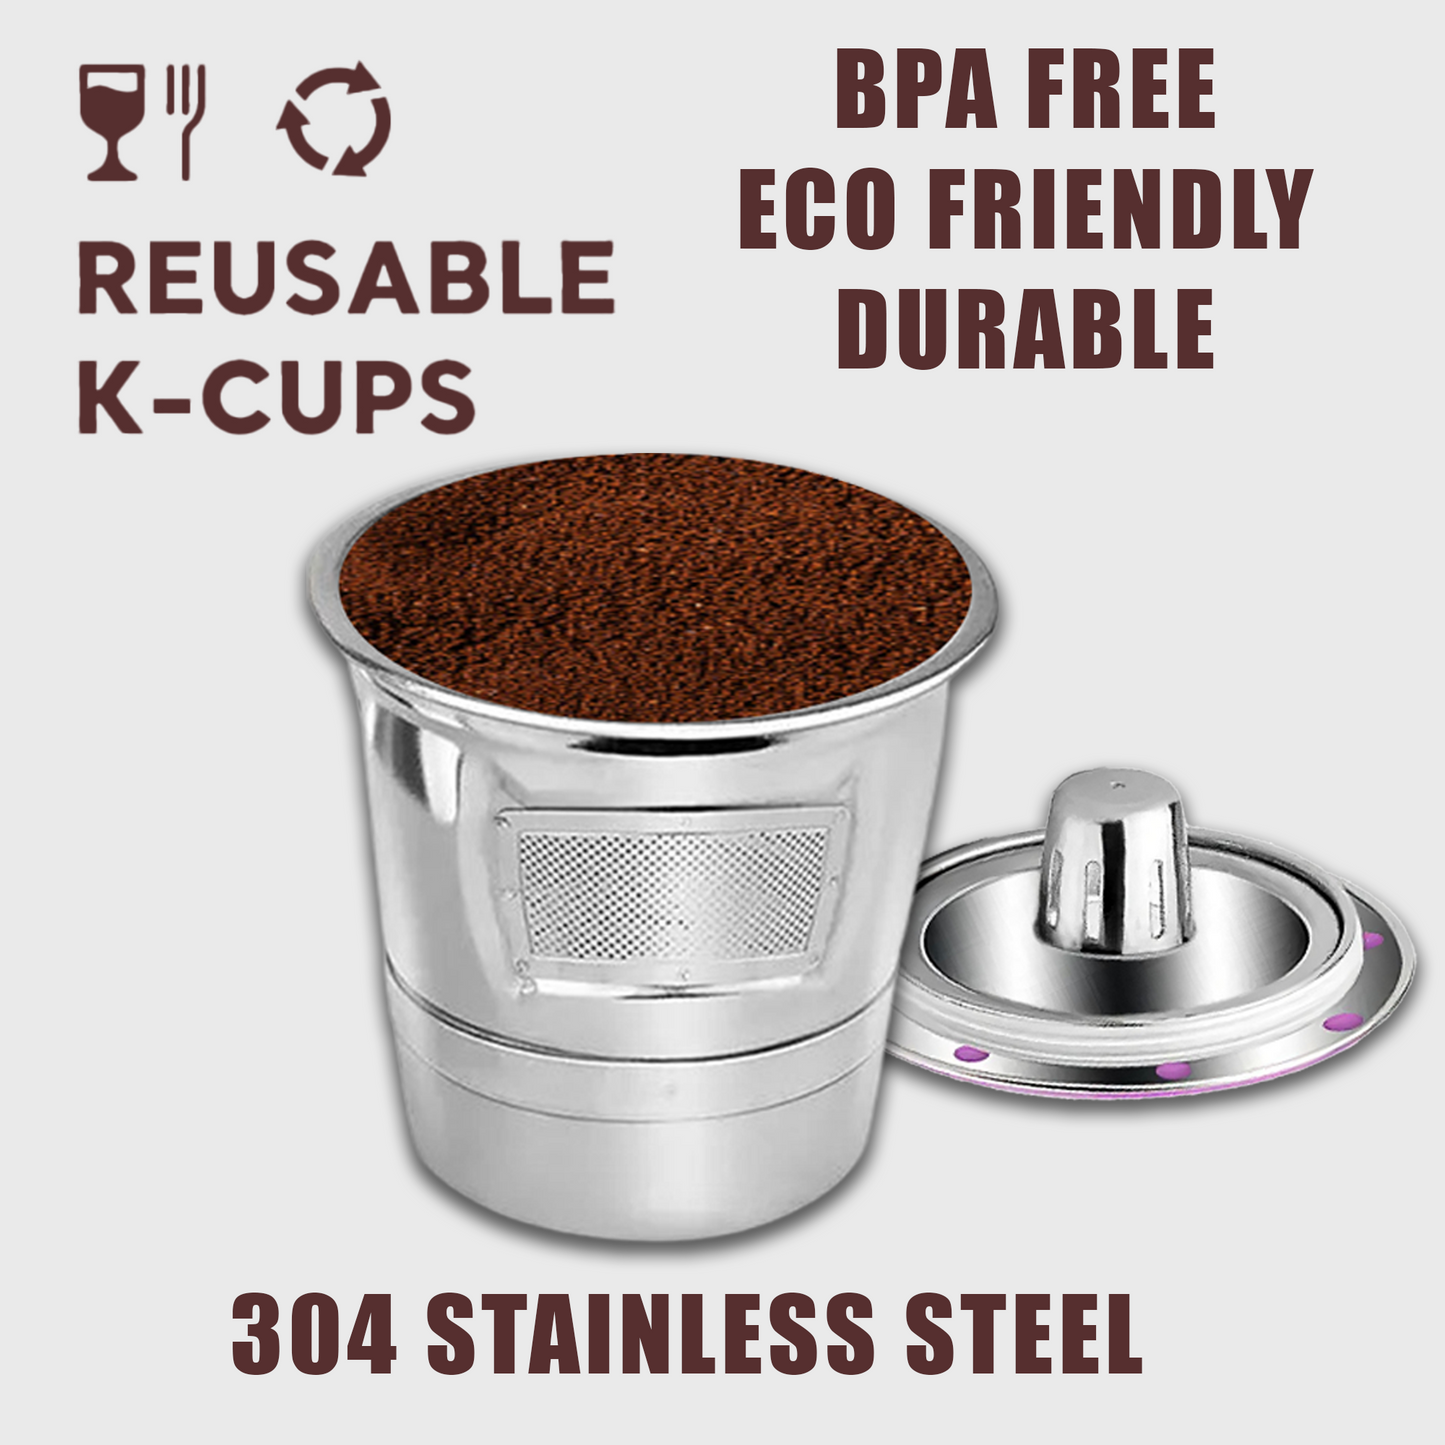 Reusable K Cup Coffee Filter for Keurig 1.0 & 2.0, Stainless Steel (2-Pack) NEW